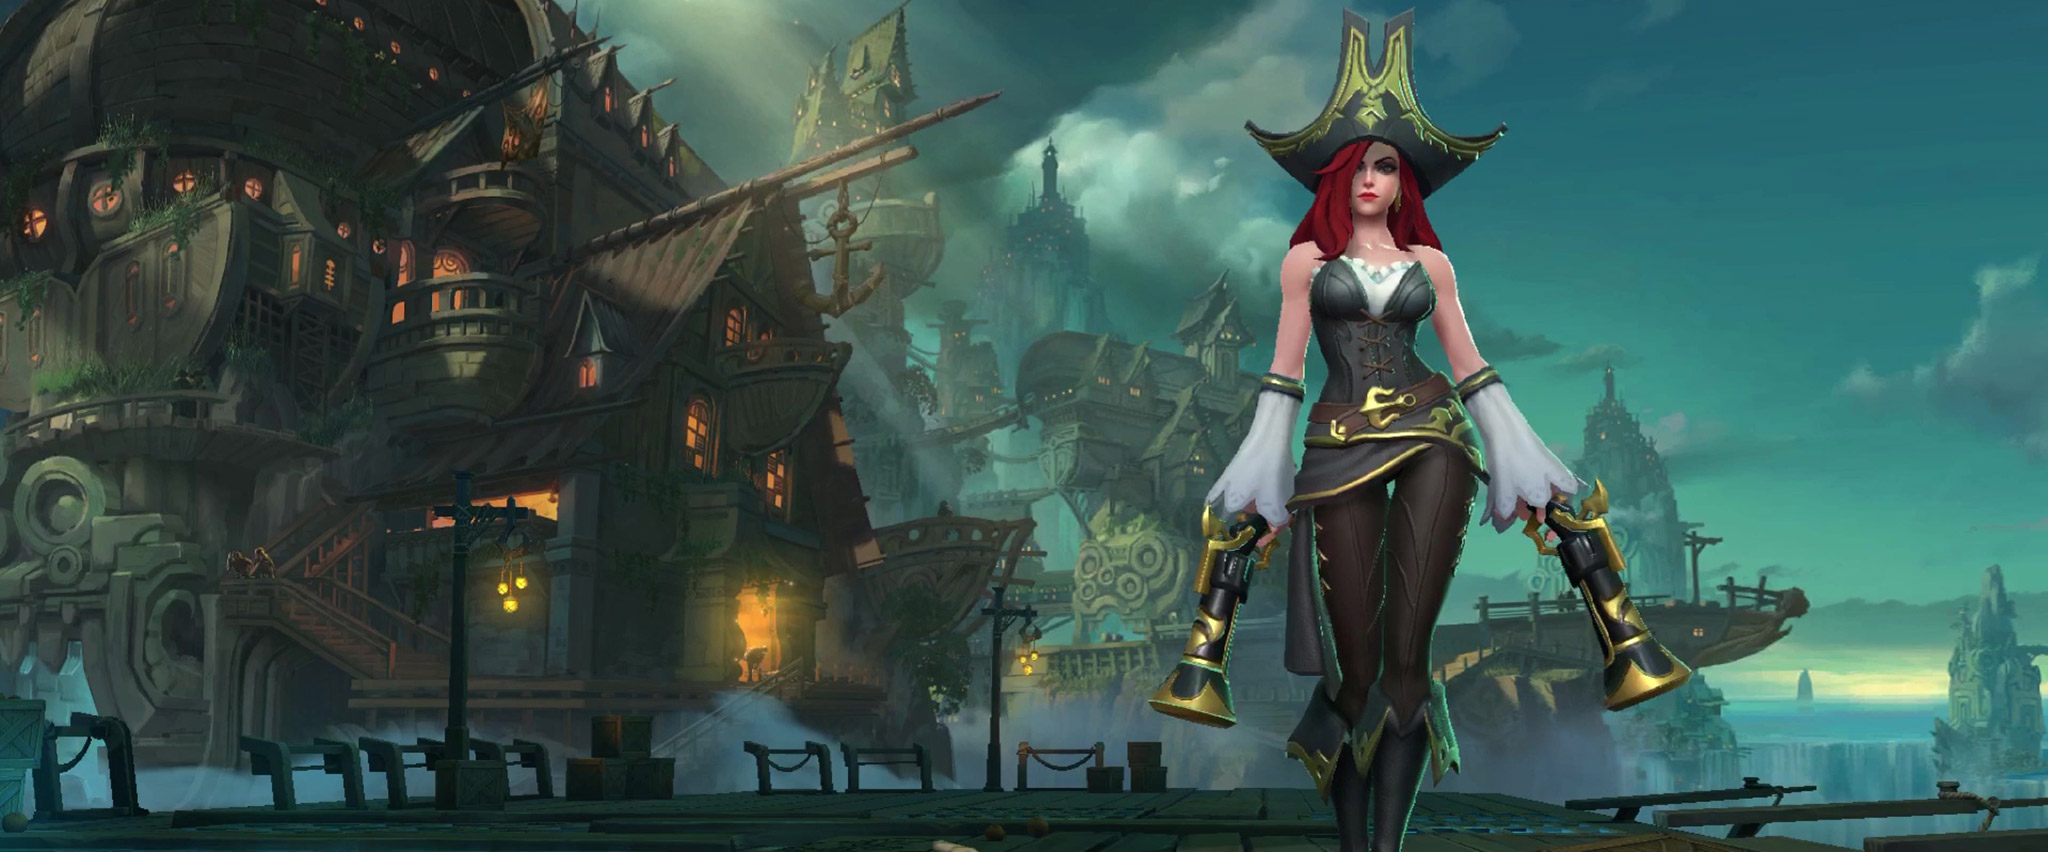 League of Miss fortune